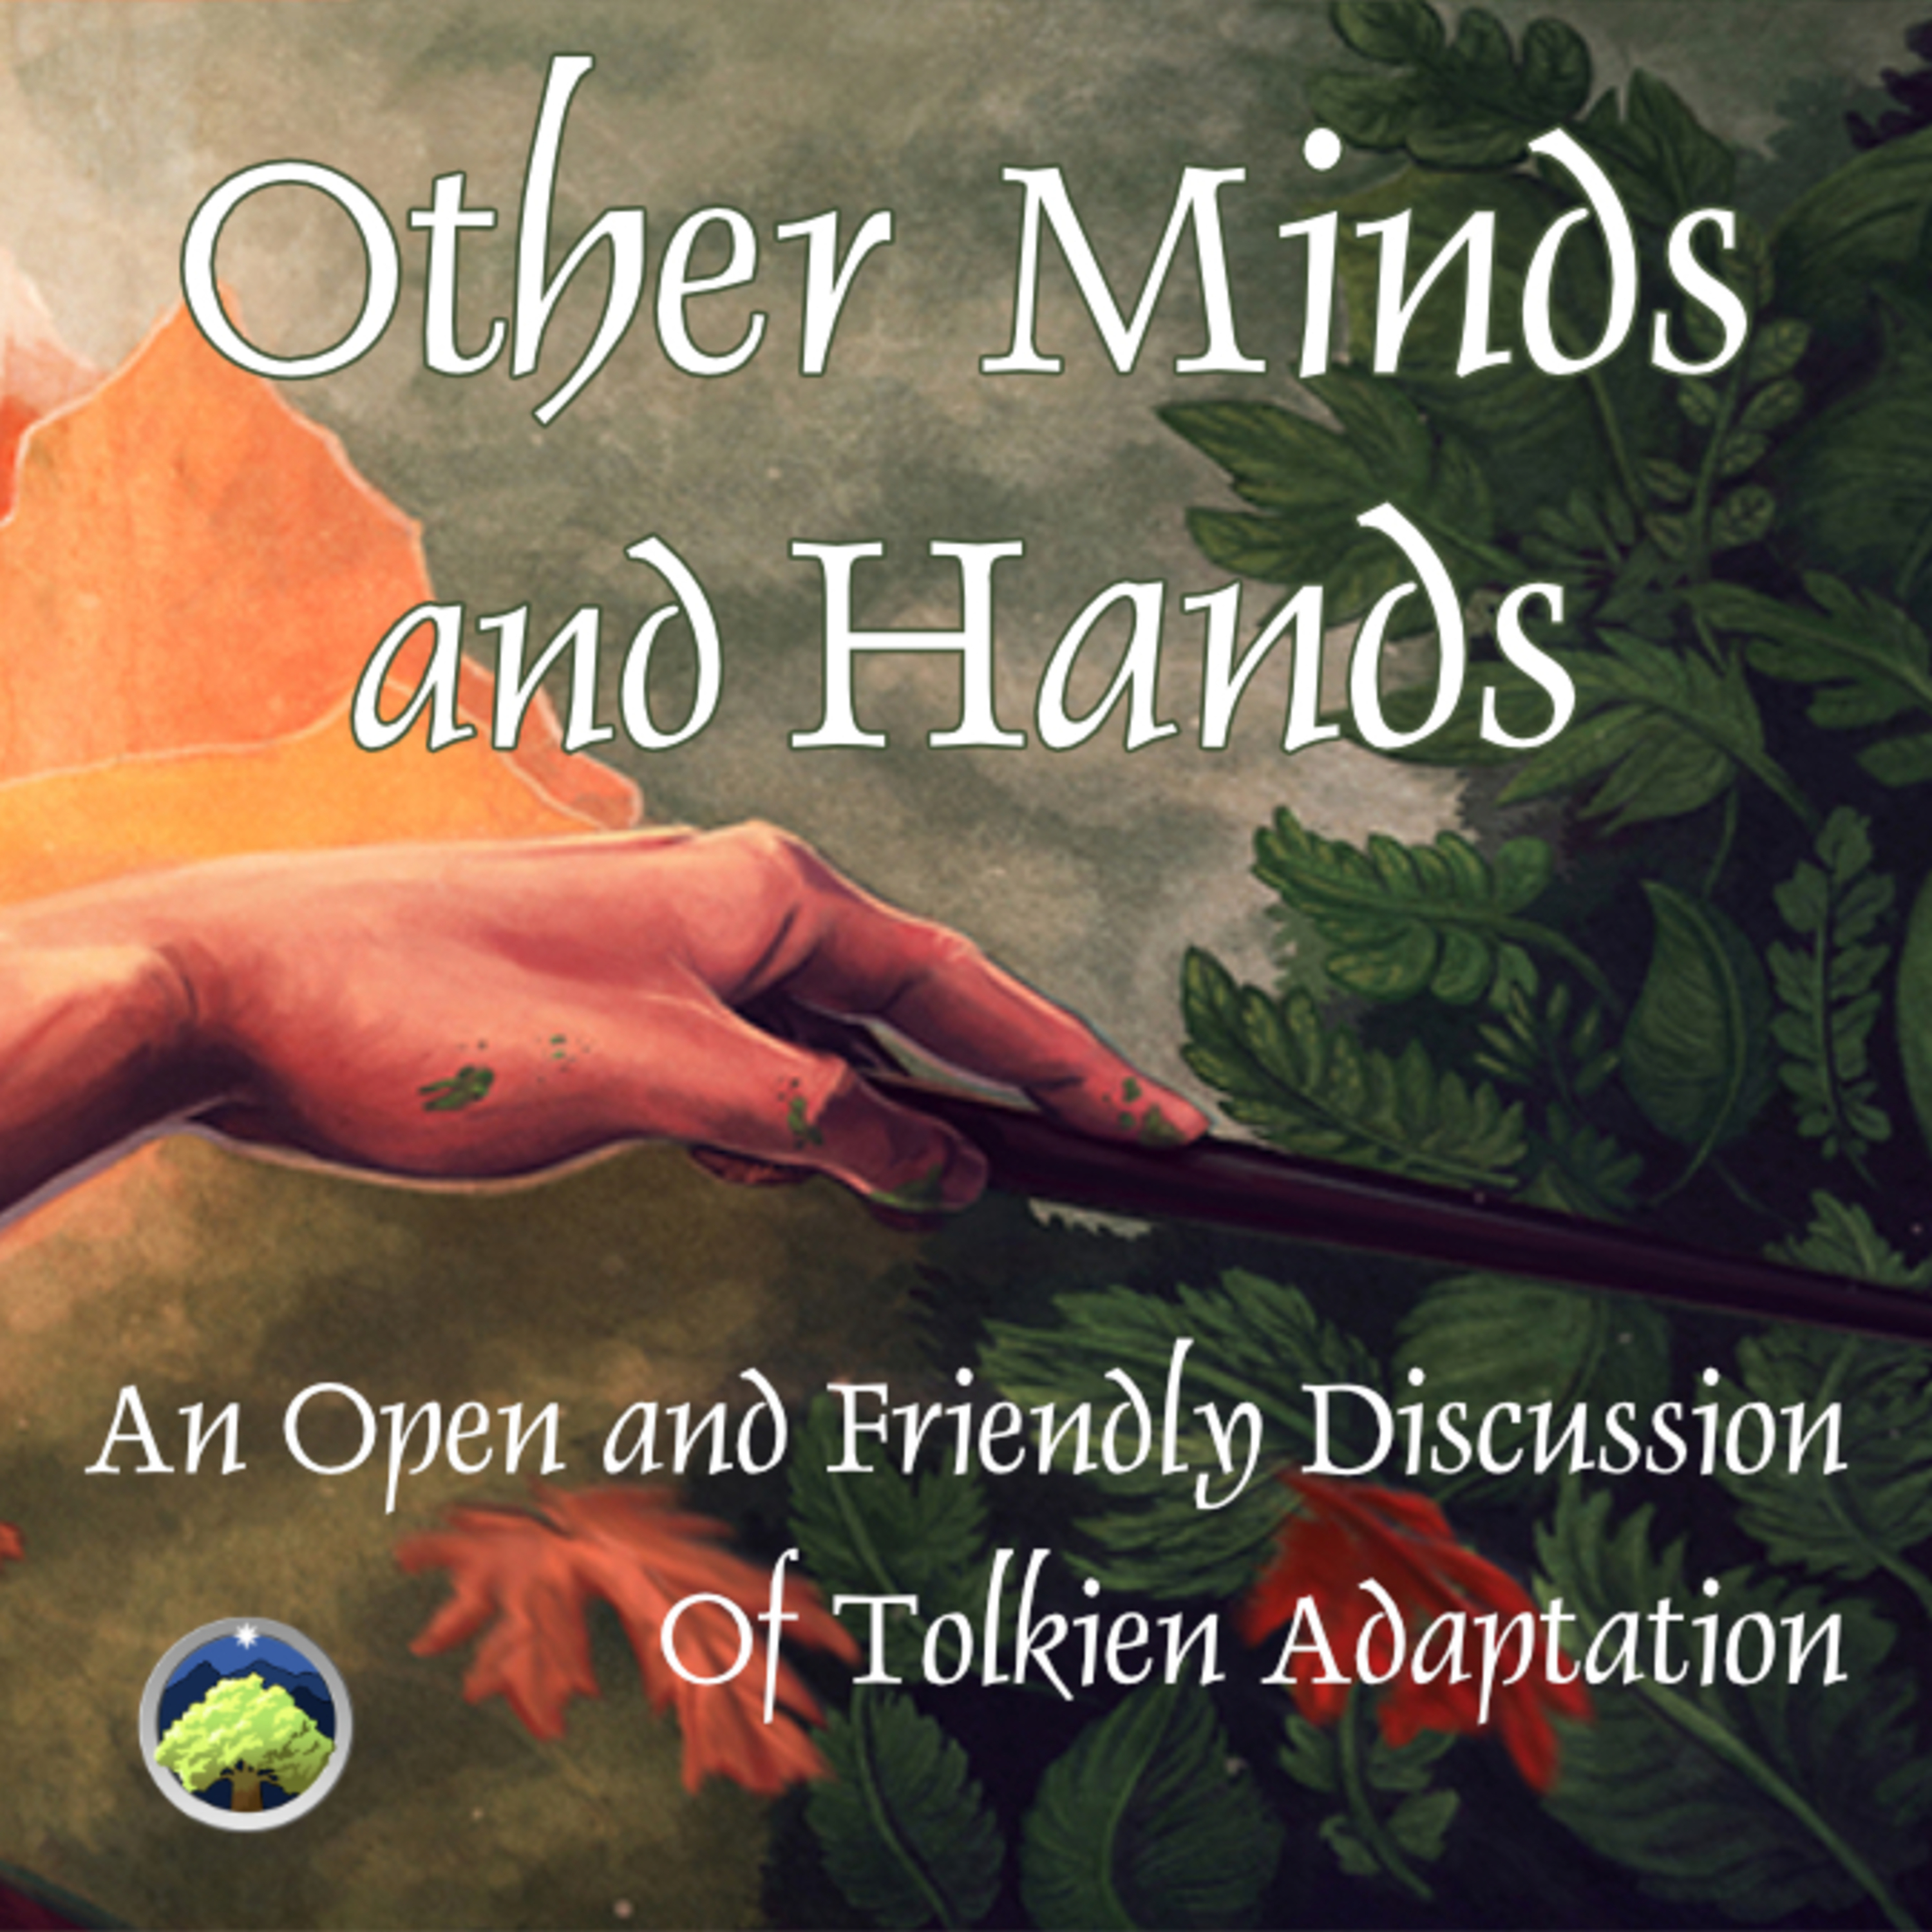 569: Other Minds and Hands, Episode 70